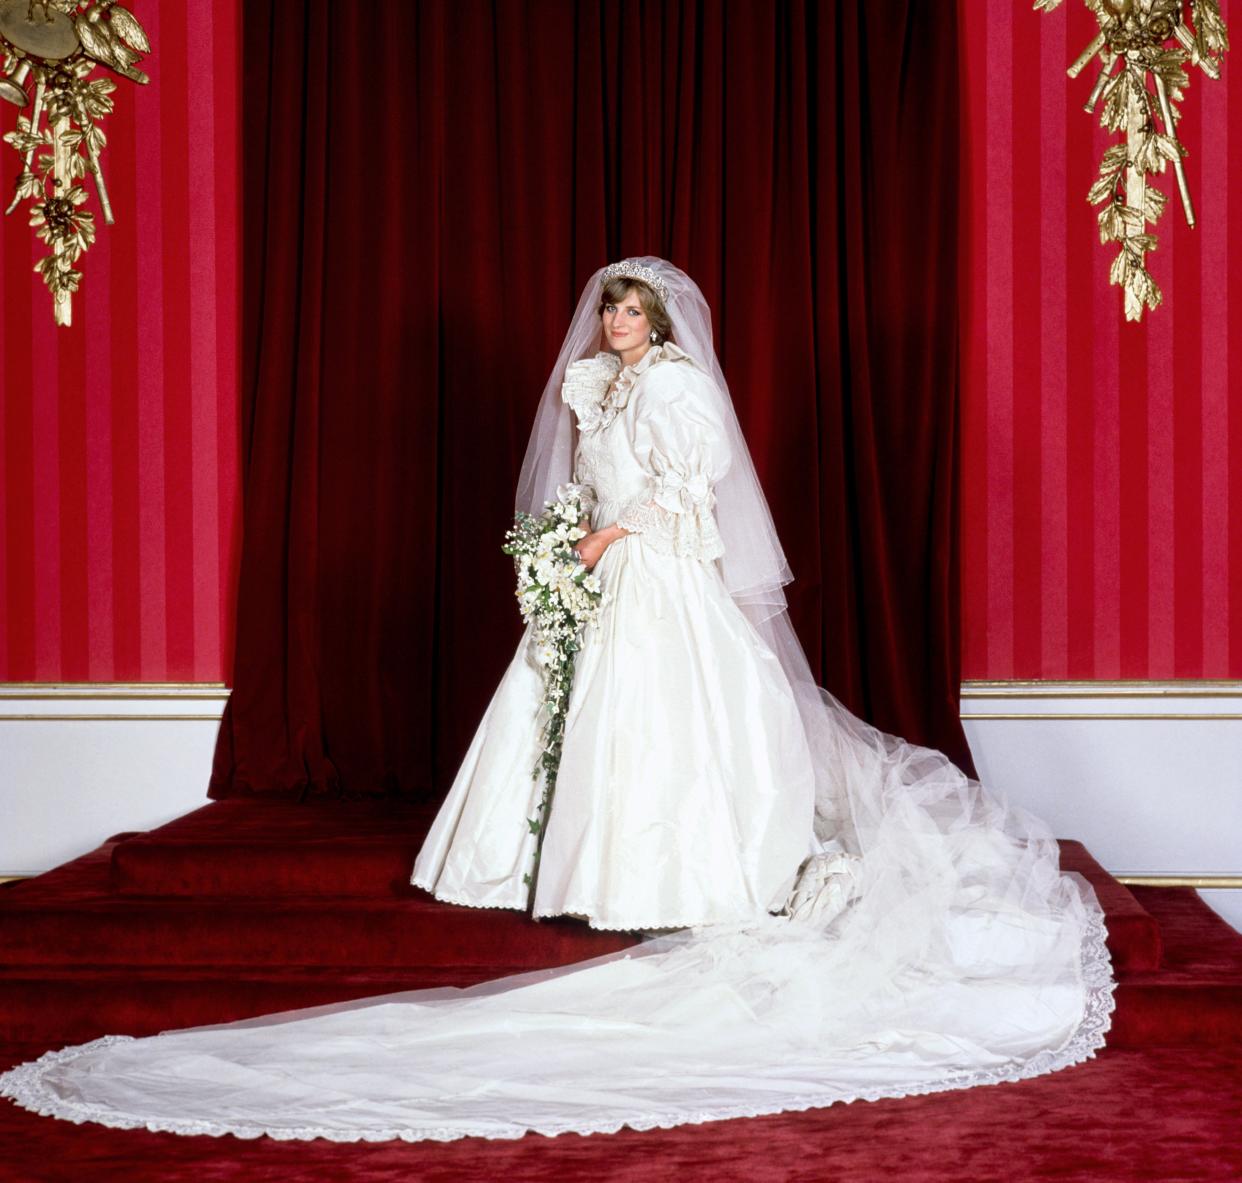 The Princess of Wales in her bridal gown at Buckingham Palace after her marriage to Prince Charles at St. Paul’s Cathedral (PA Archive)